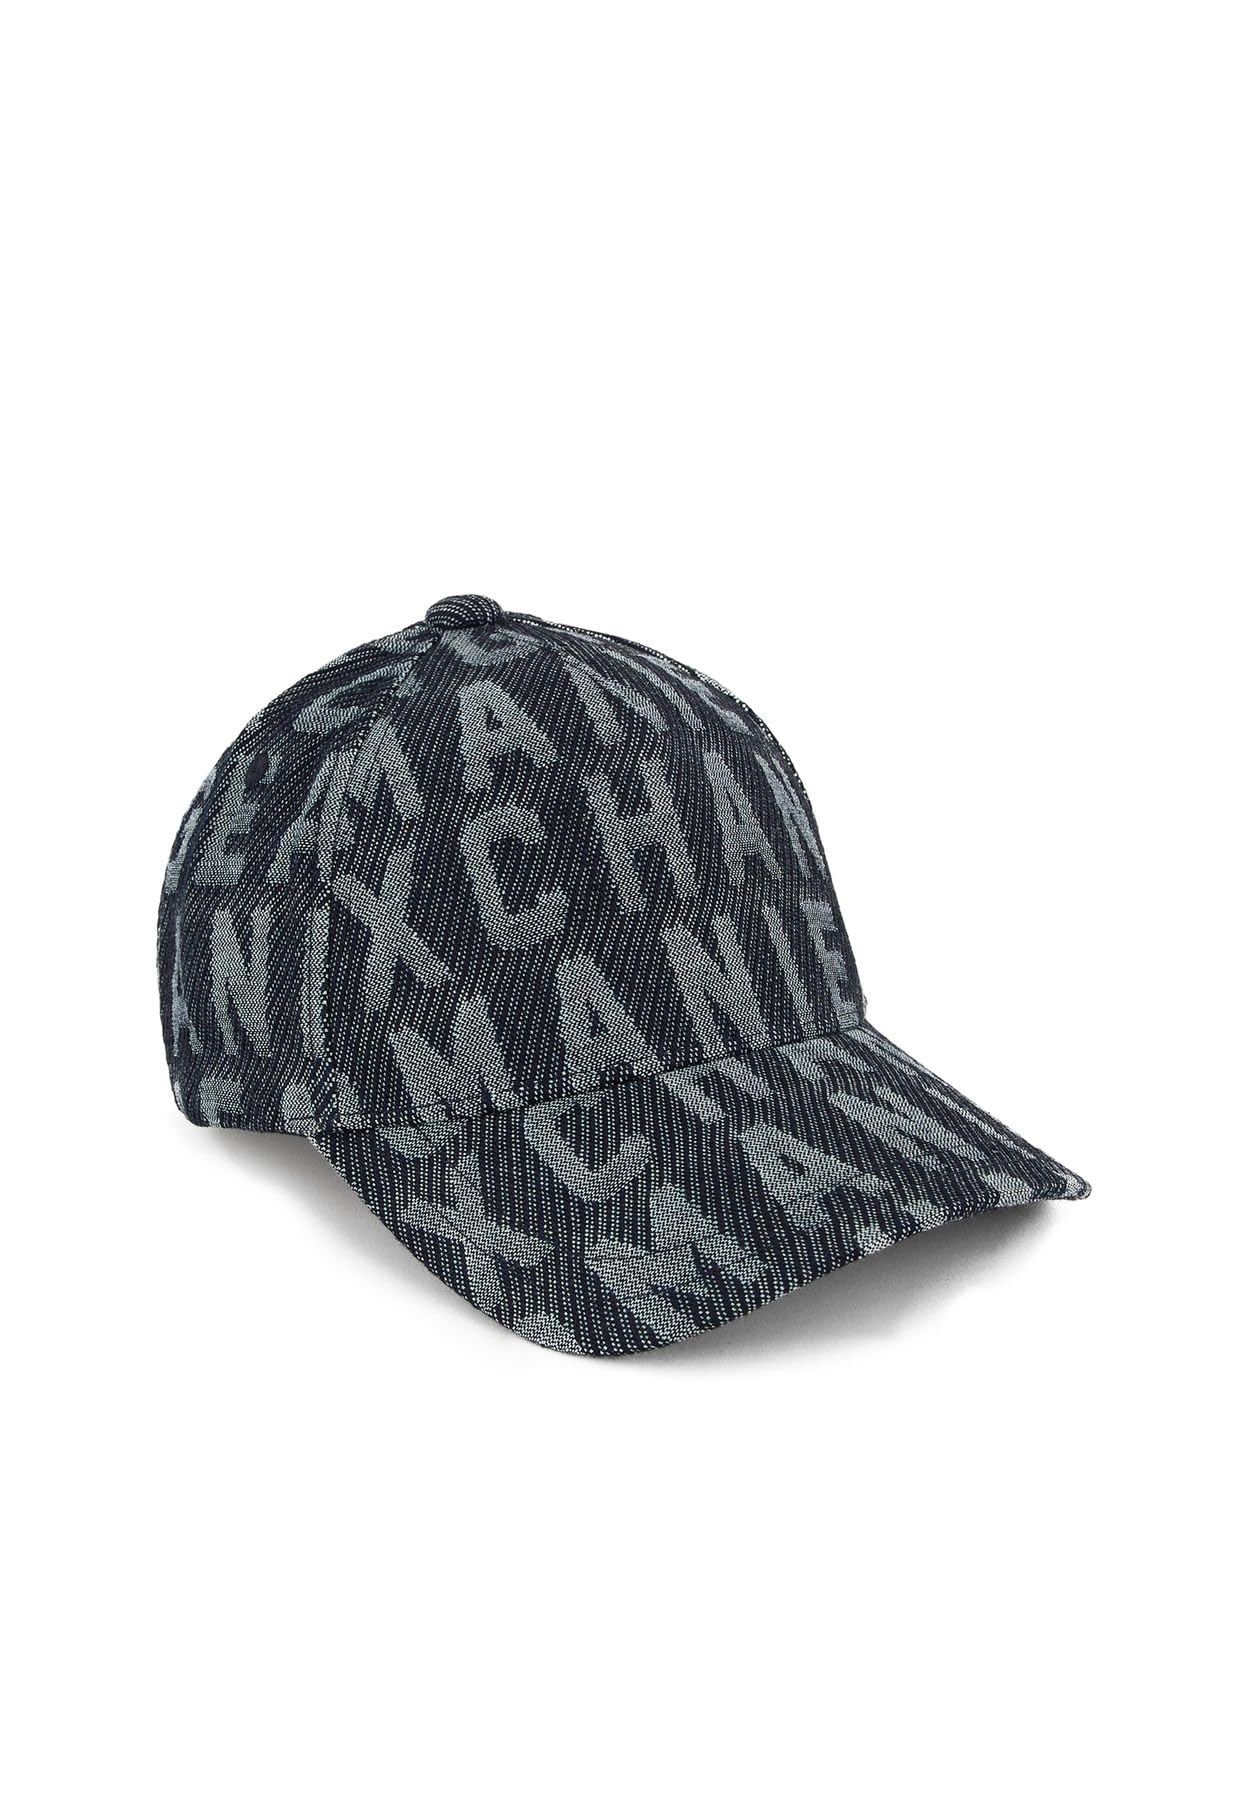 A | X ARMANI EXCHANGE Men's Limited Edition Denim Capsule Hat, Navy Allover Logo - Caps Fitted Caps Fitted Emporio Armani